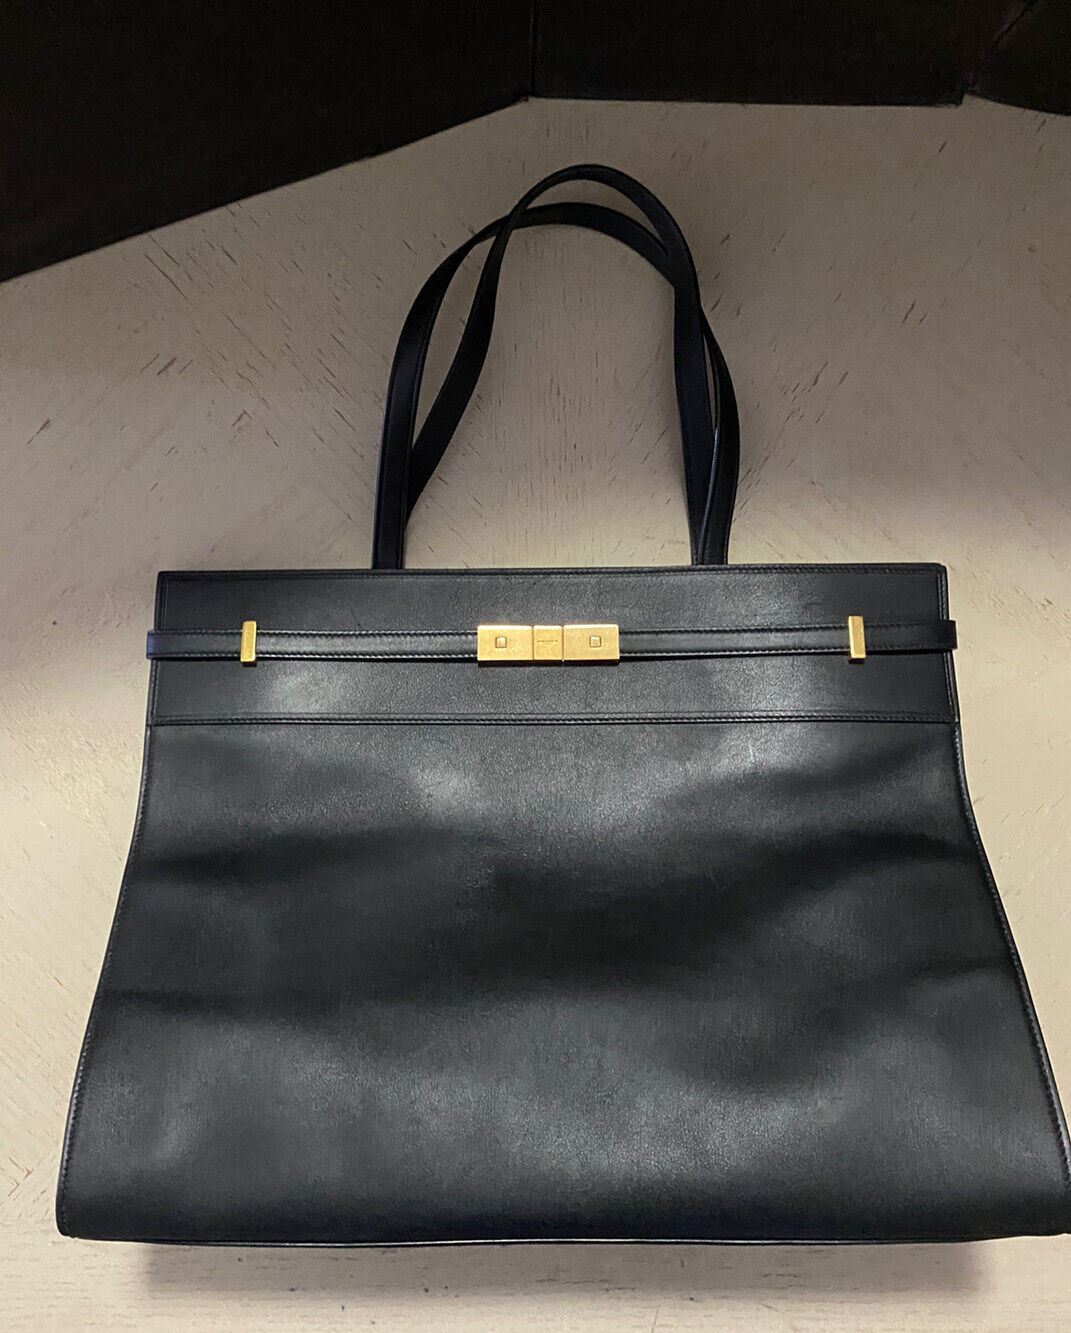 New $2350 Saint Laurent YSL Leather Top Handle Tote Bag Black Italy